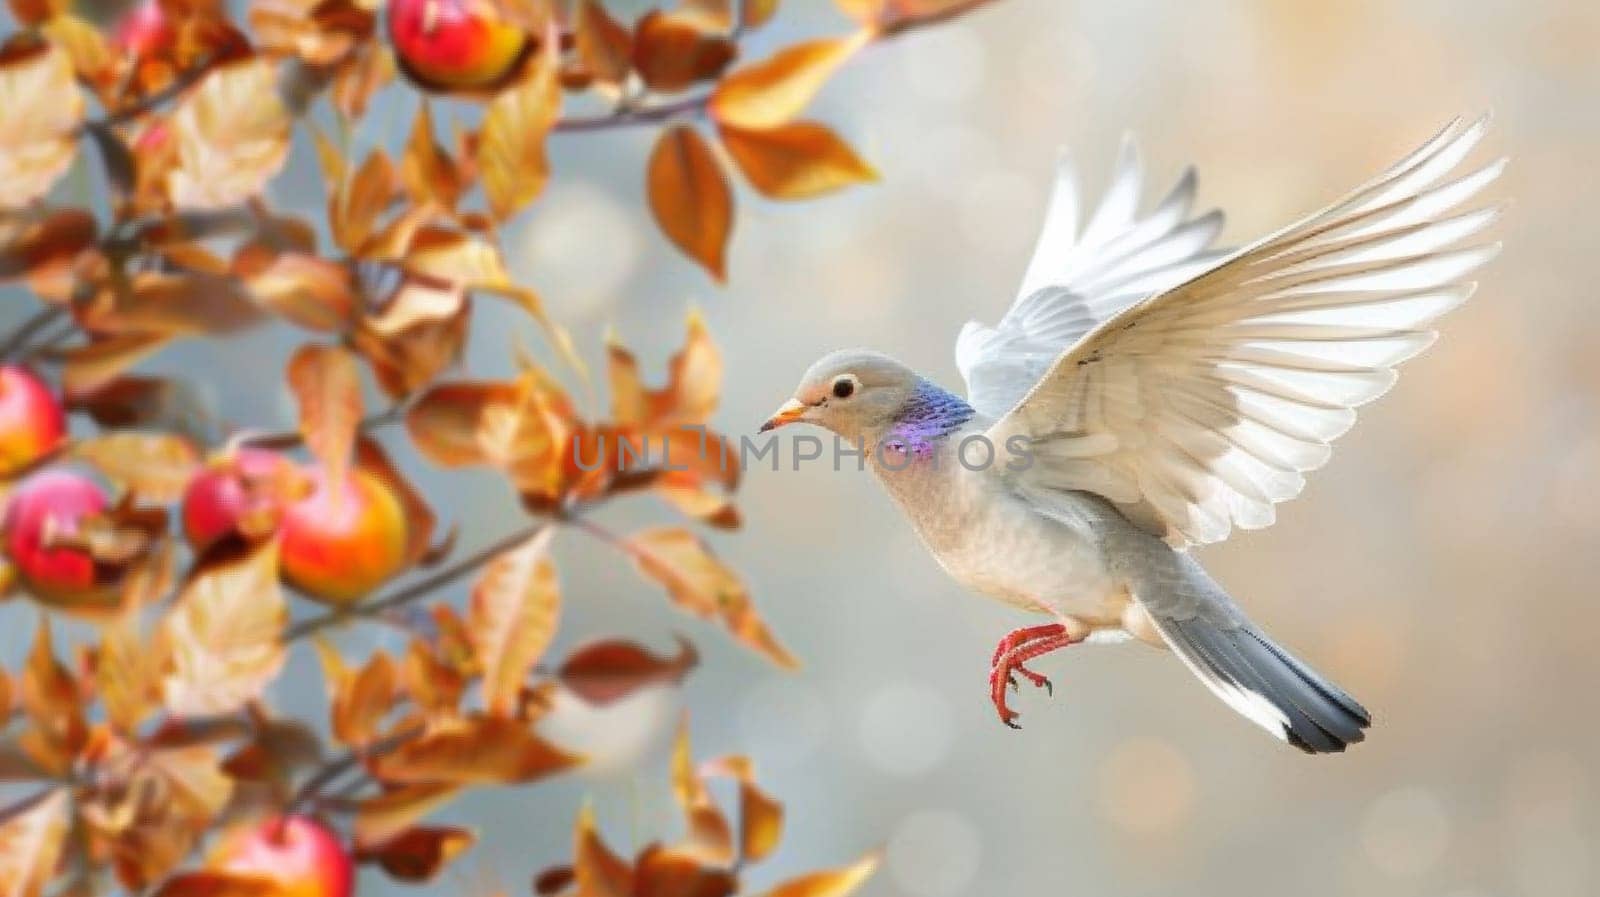 A bird flying in the air over a tree with fruit, AI by starush